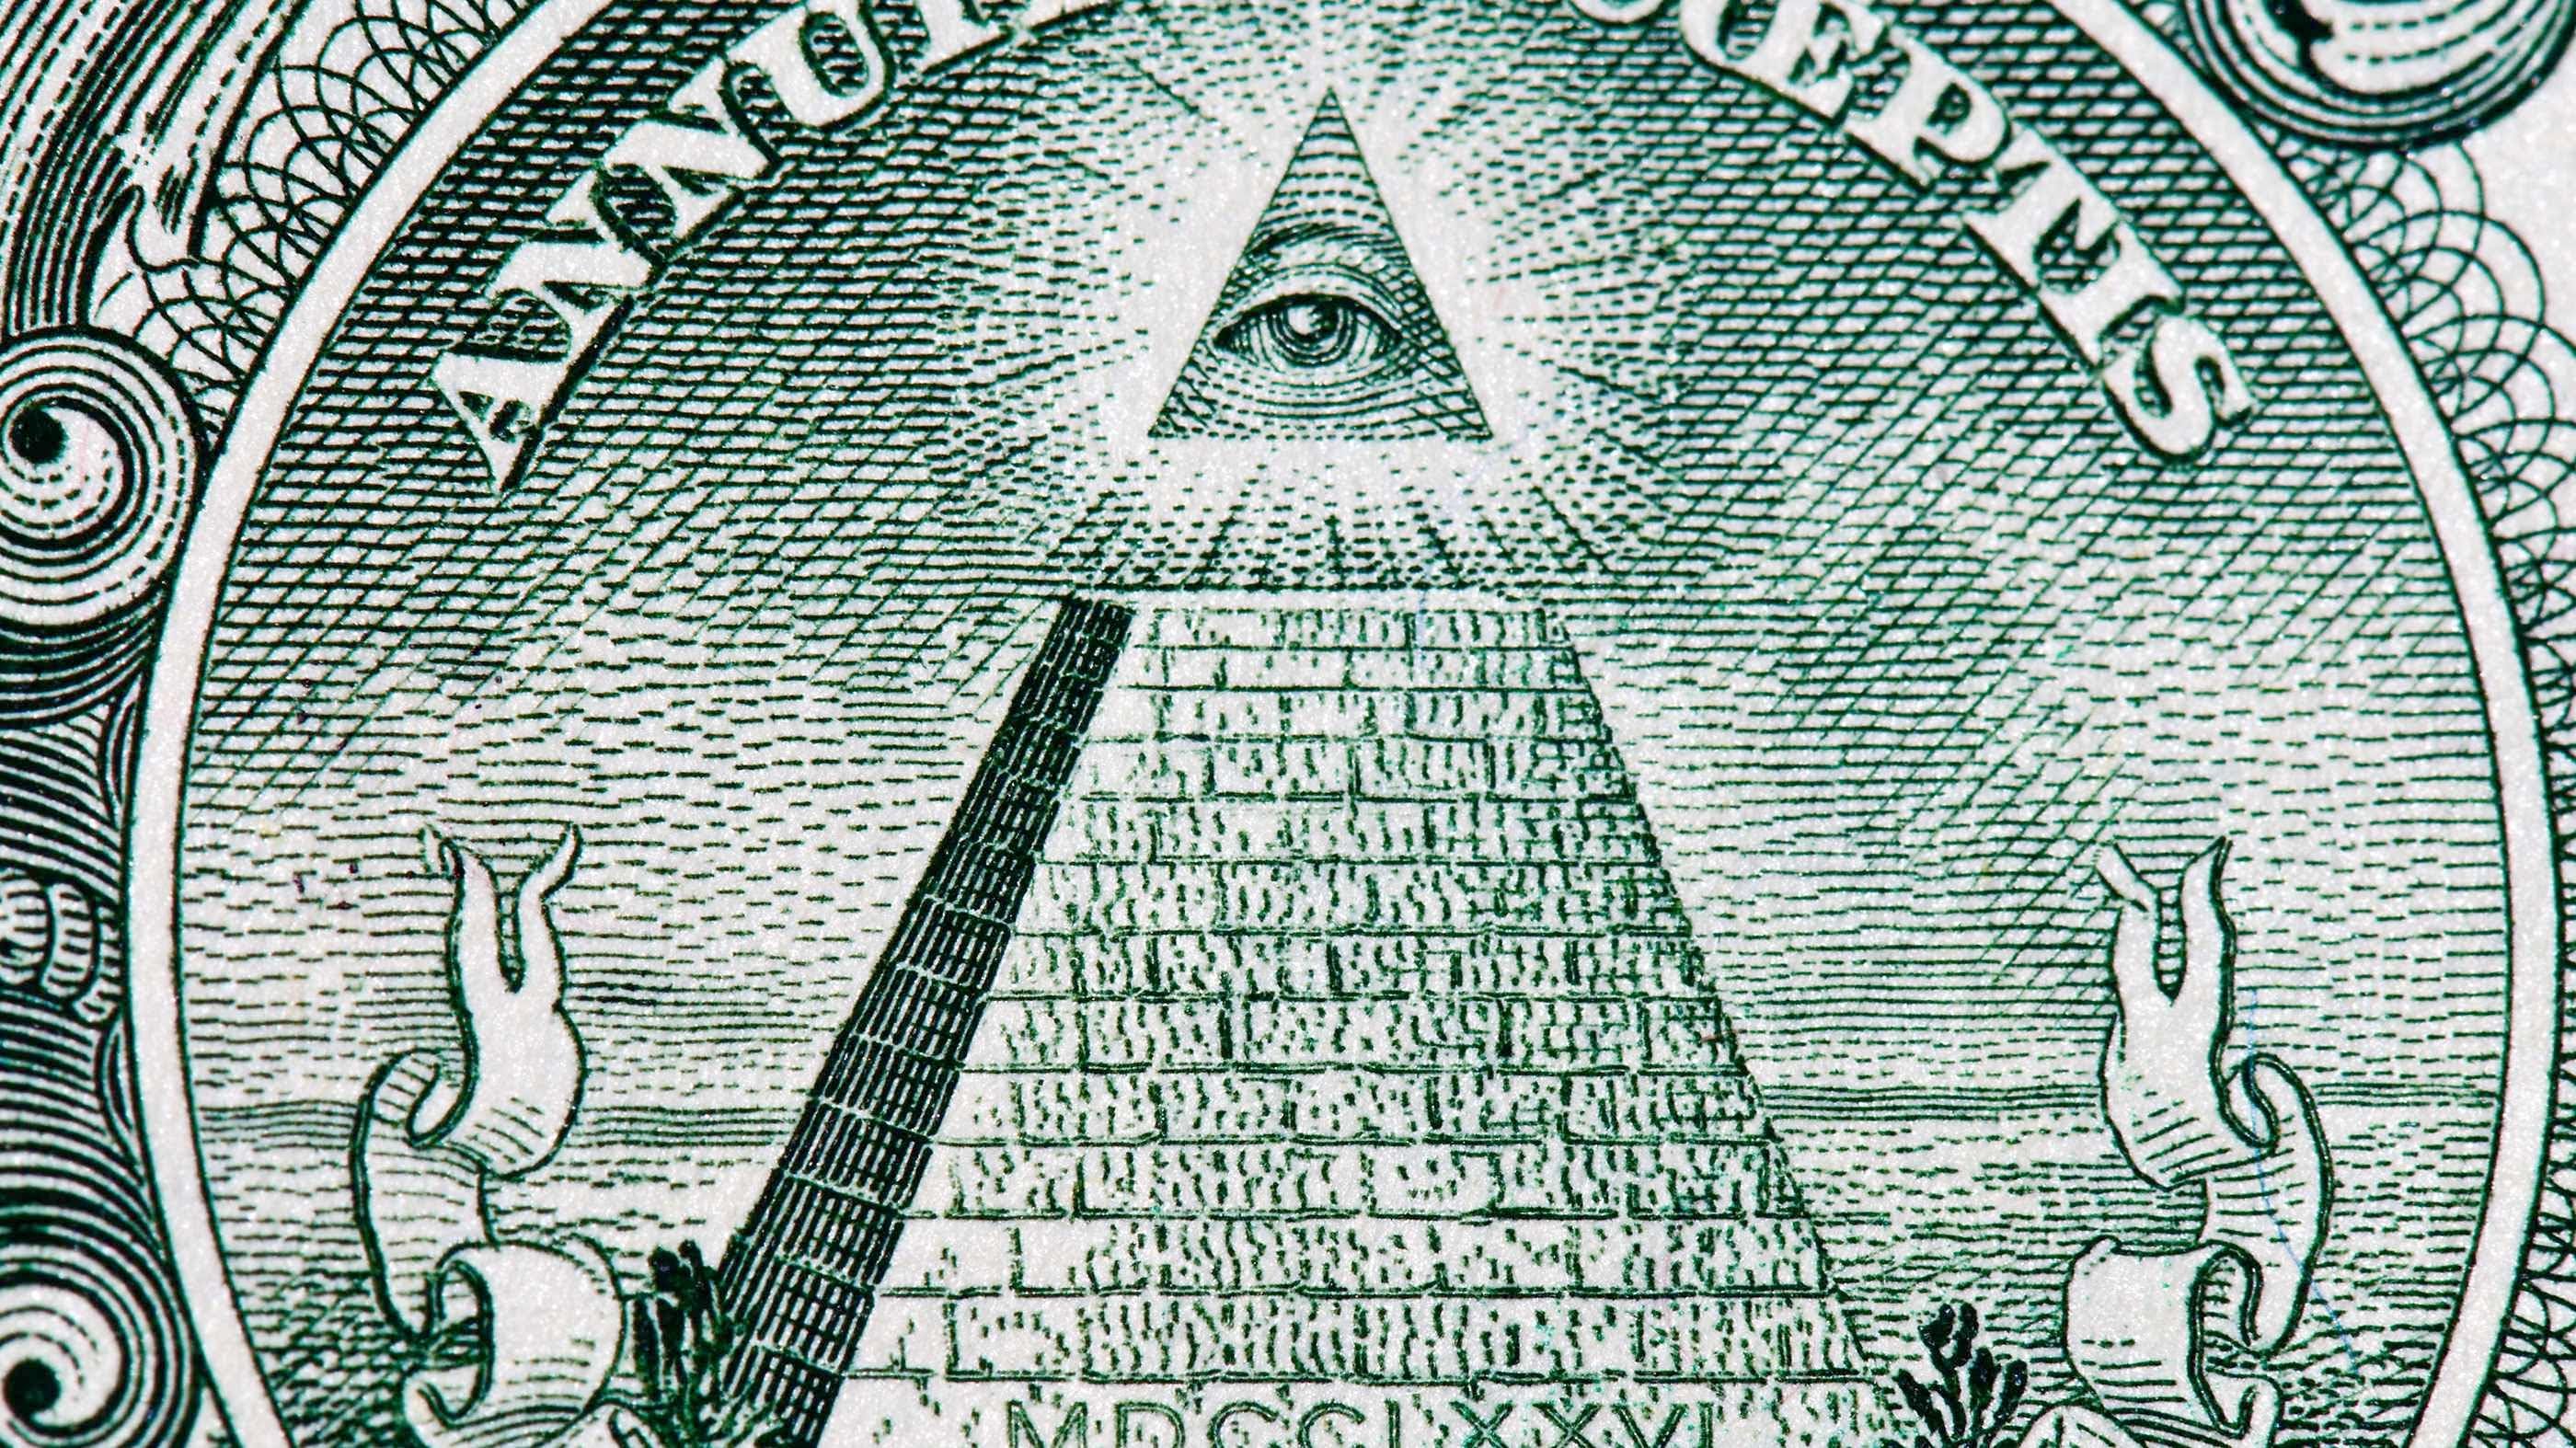 You are currently viewing Are the Illuminati real?